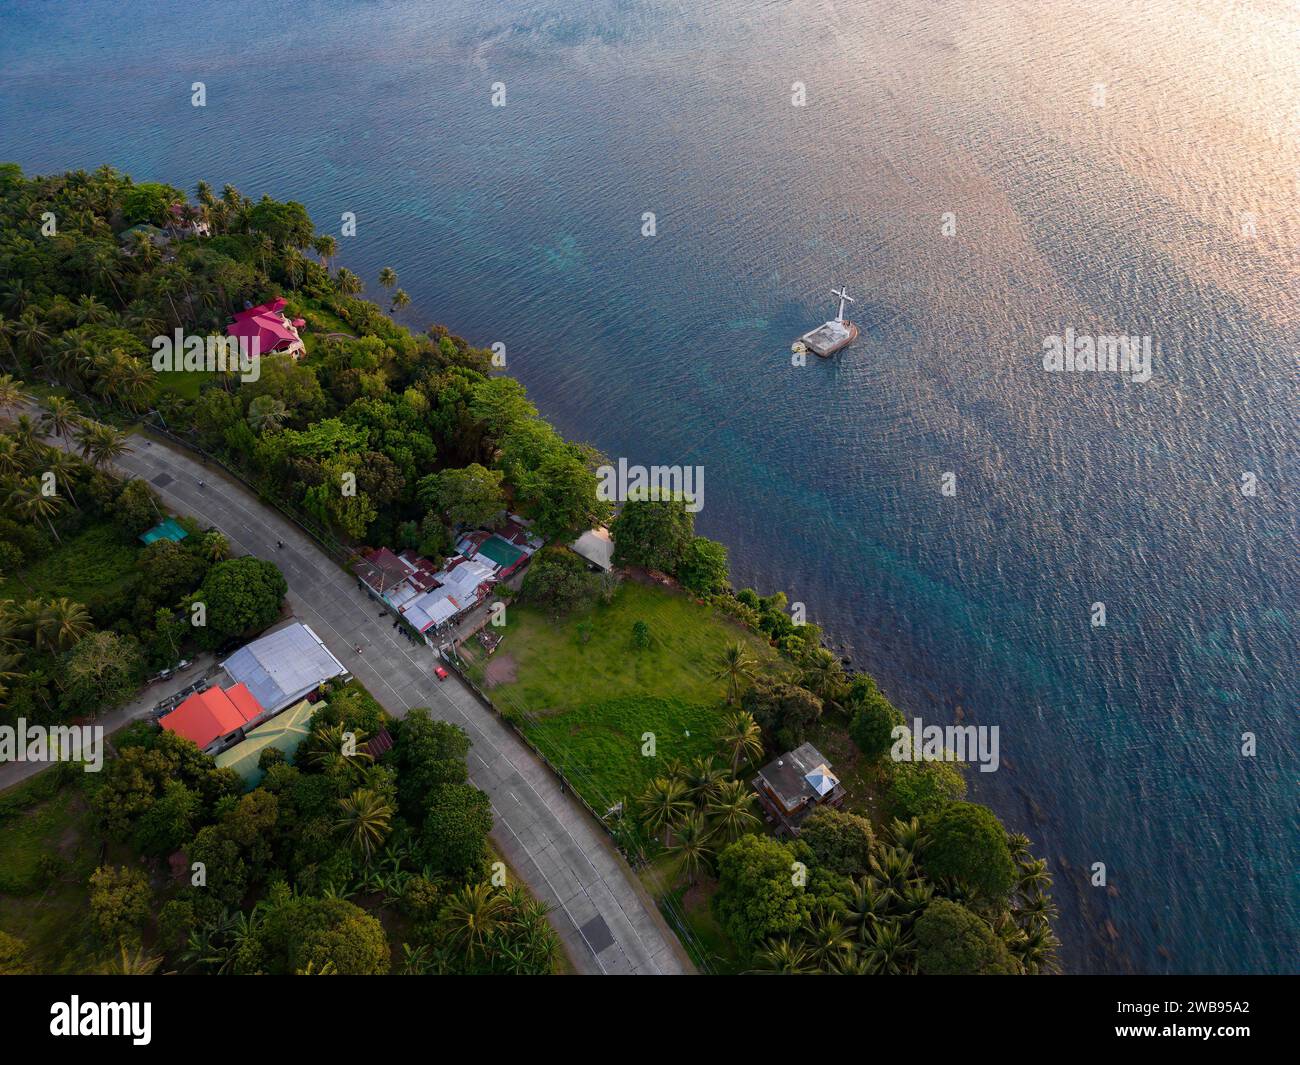 An aerial view of Sunken Cemetery, Siquijor island, Philippines Stock Photo